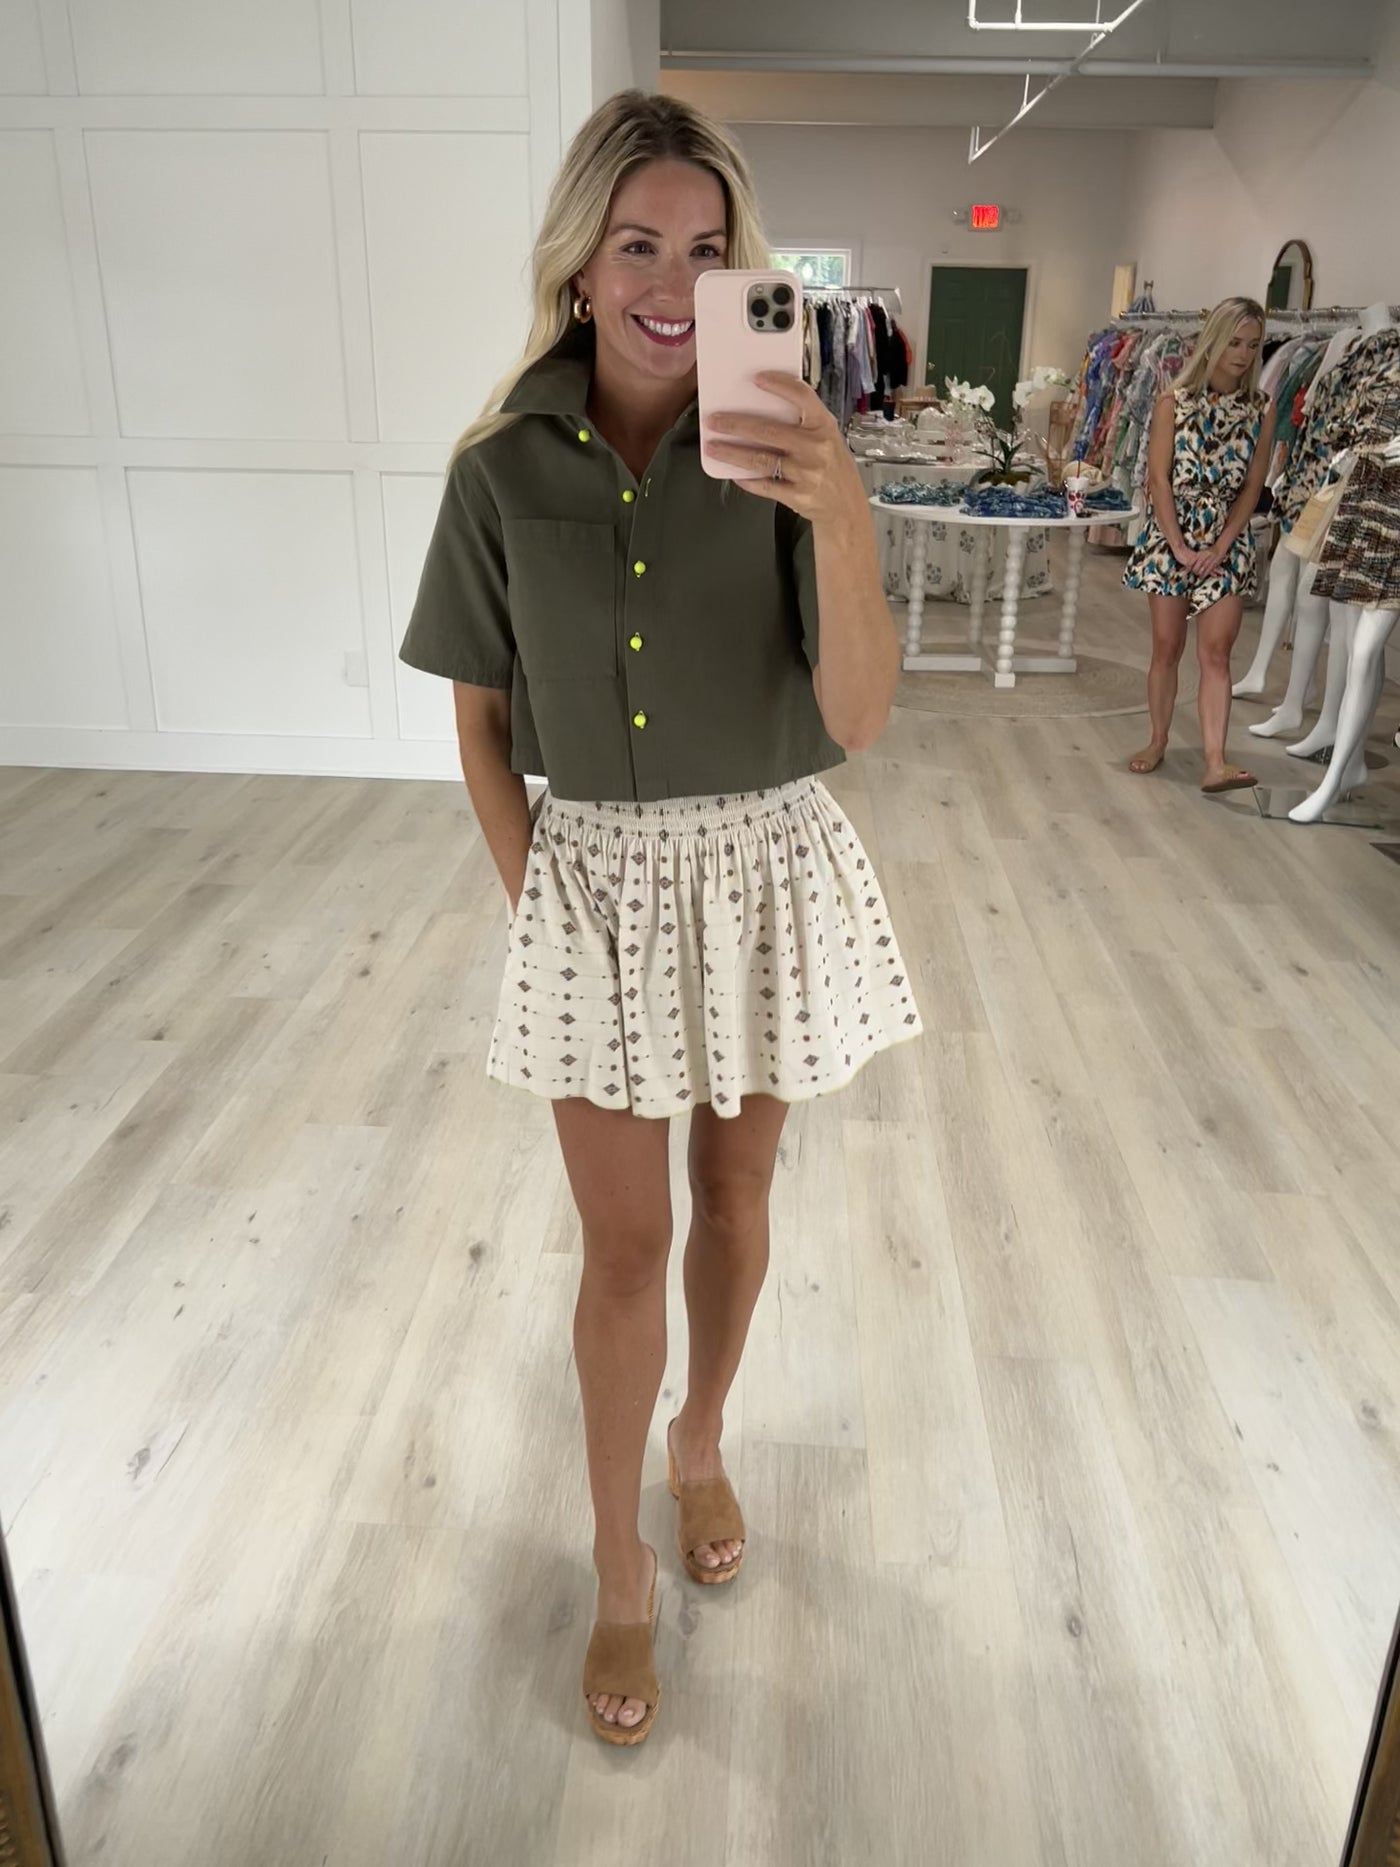 Scout Top in Army Green